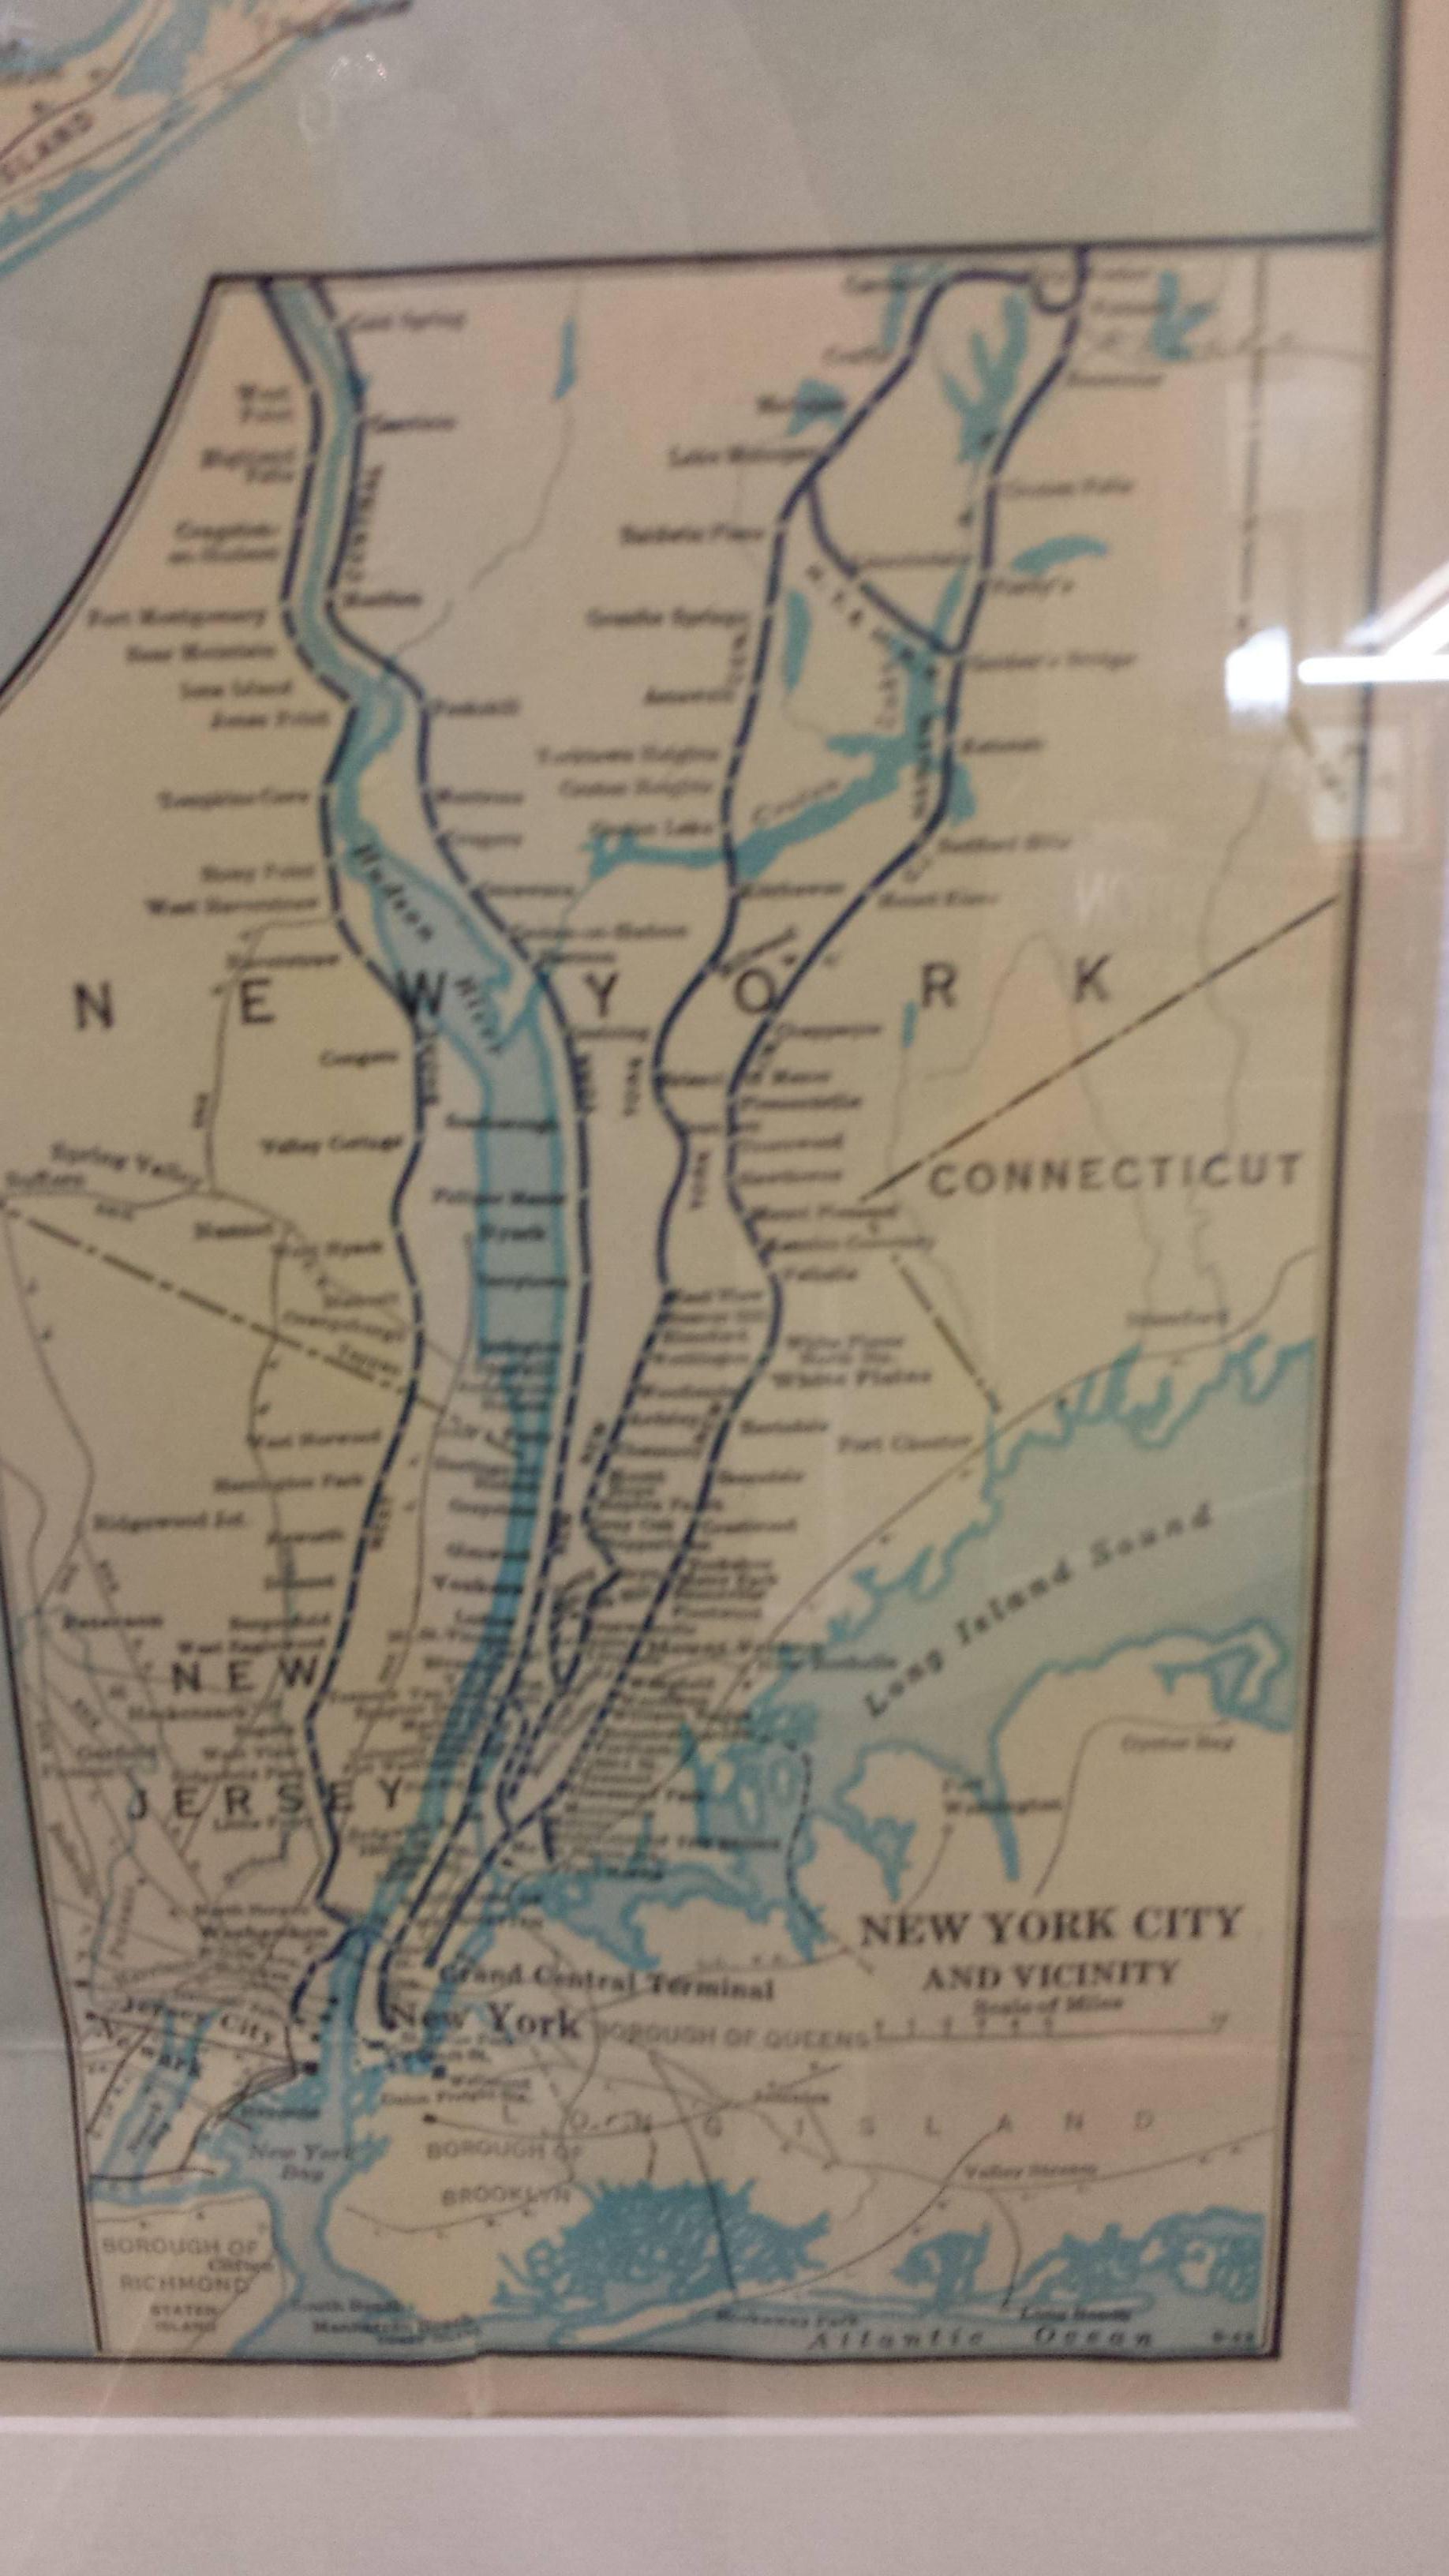 Mid-Century Modern Framed New York Central Railway Map Original from 1943 with Railway Label